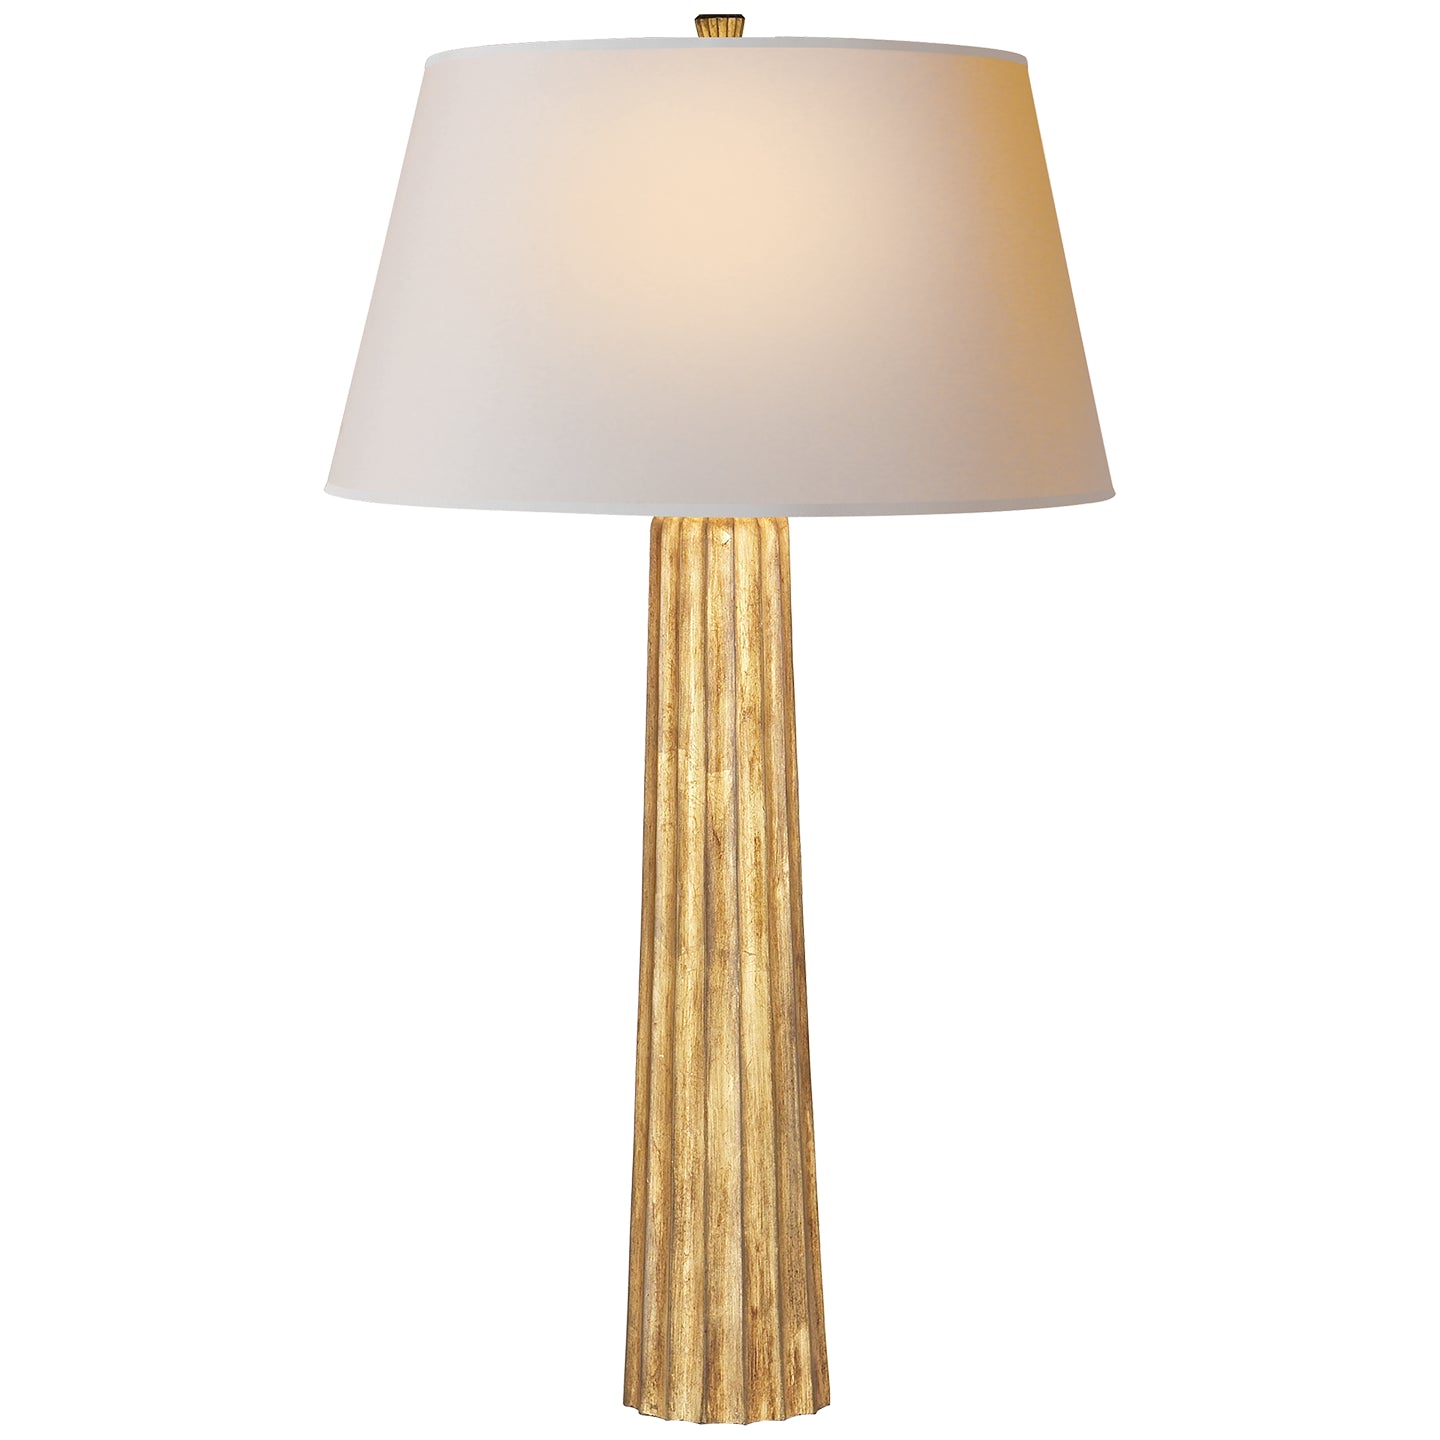 Visual Comfort Signature - CHA 8906GI-NP - One Light Table Lamp - Fluted Spire - Gilded Iron